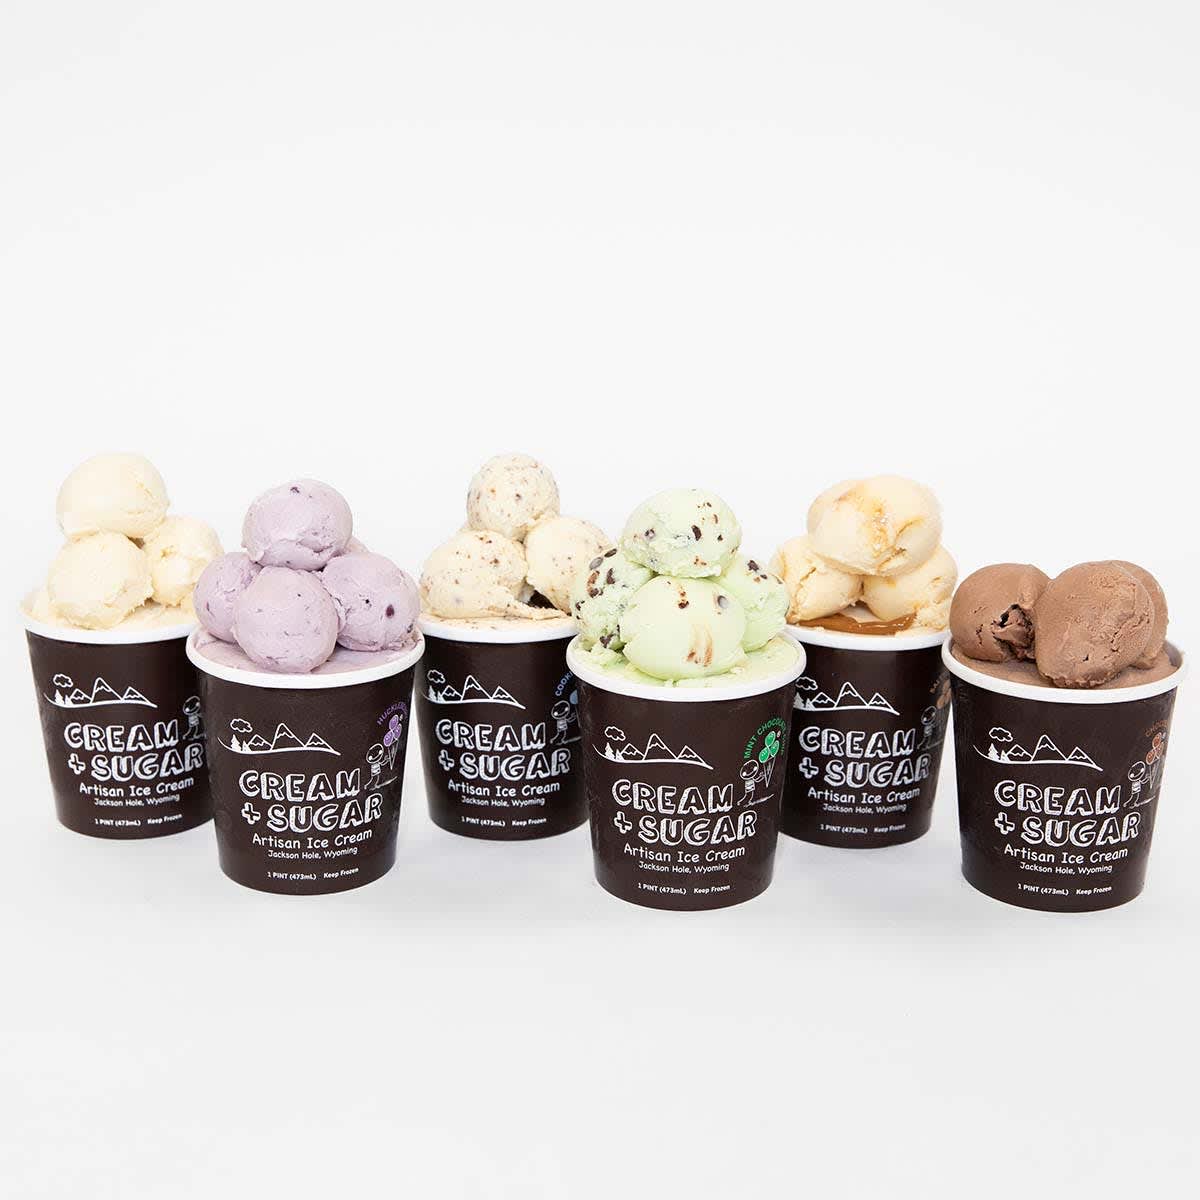 The Ultimate Ice Cream Sampler Delivery, Get Ice Cream Delivered